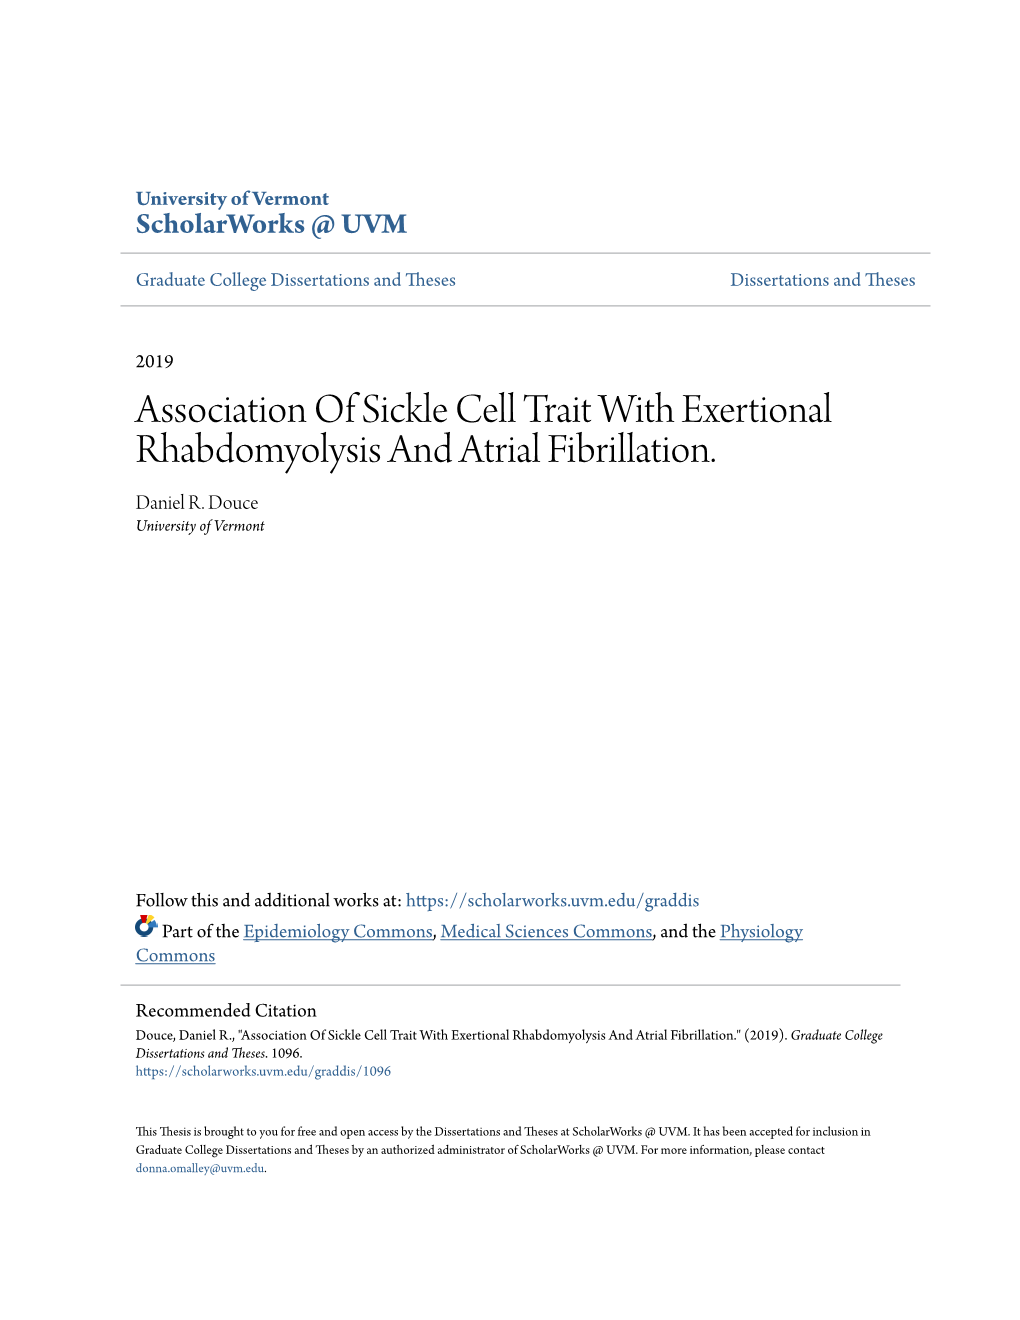 Association of Sickle Cell Trait with Exertional Rhabdomyolysis and Atrial Fibrillation